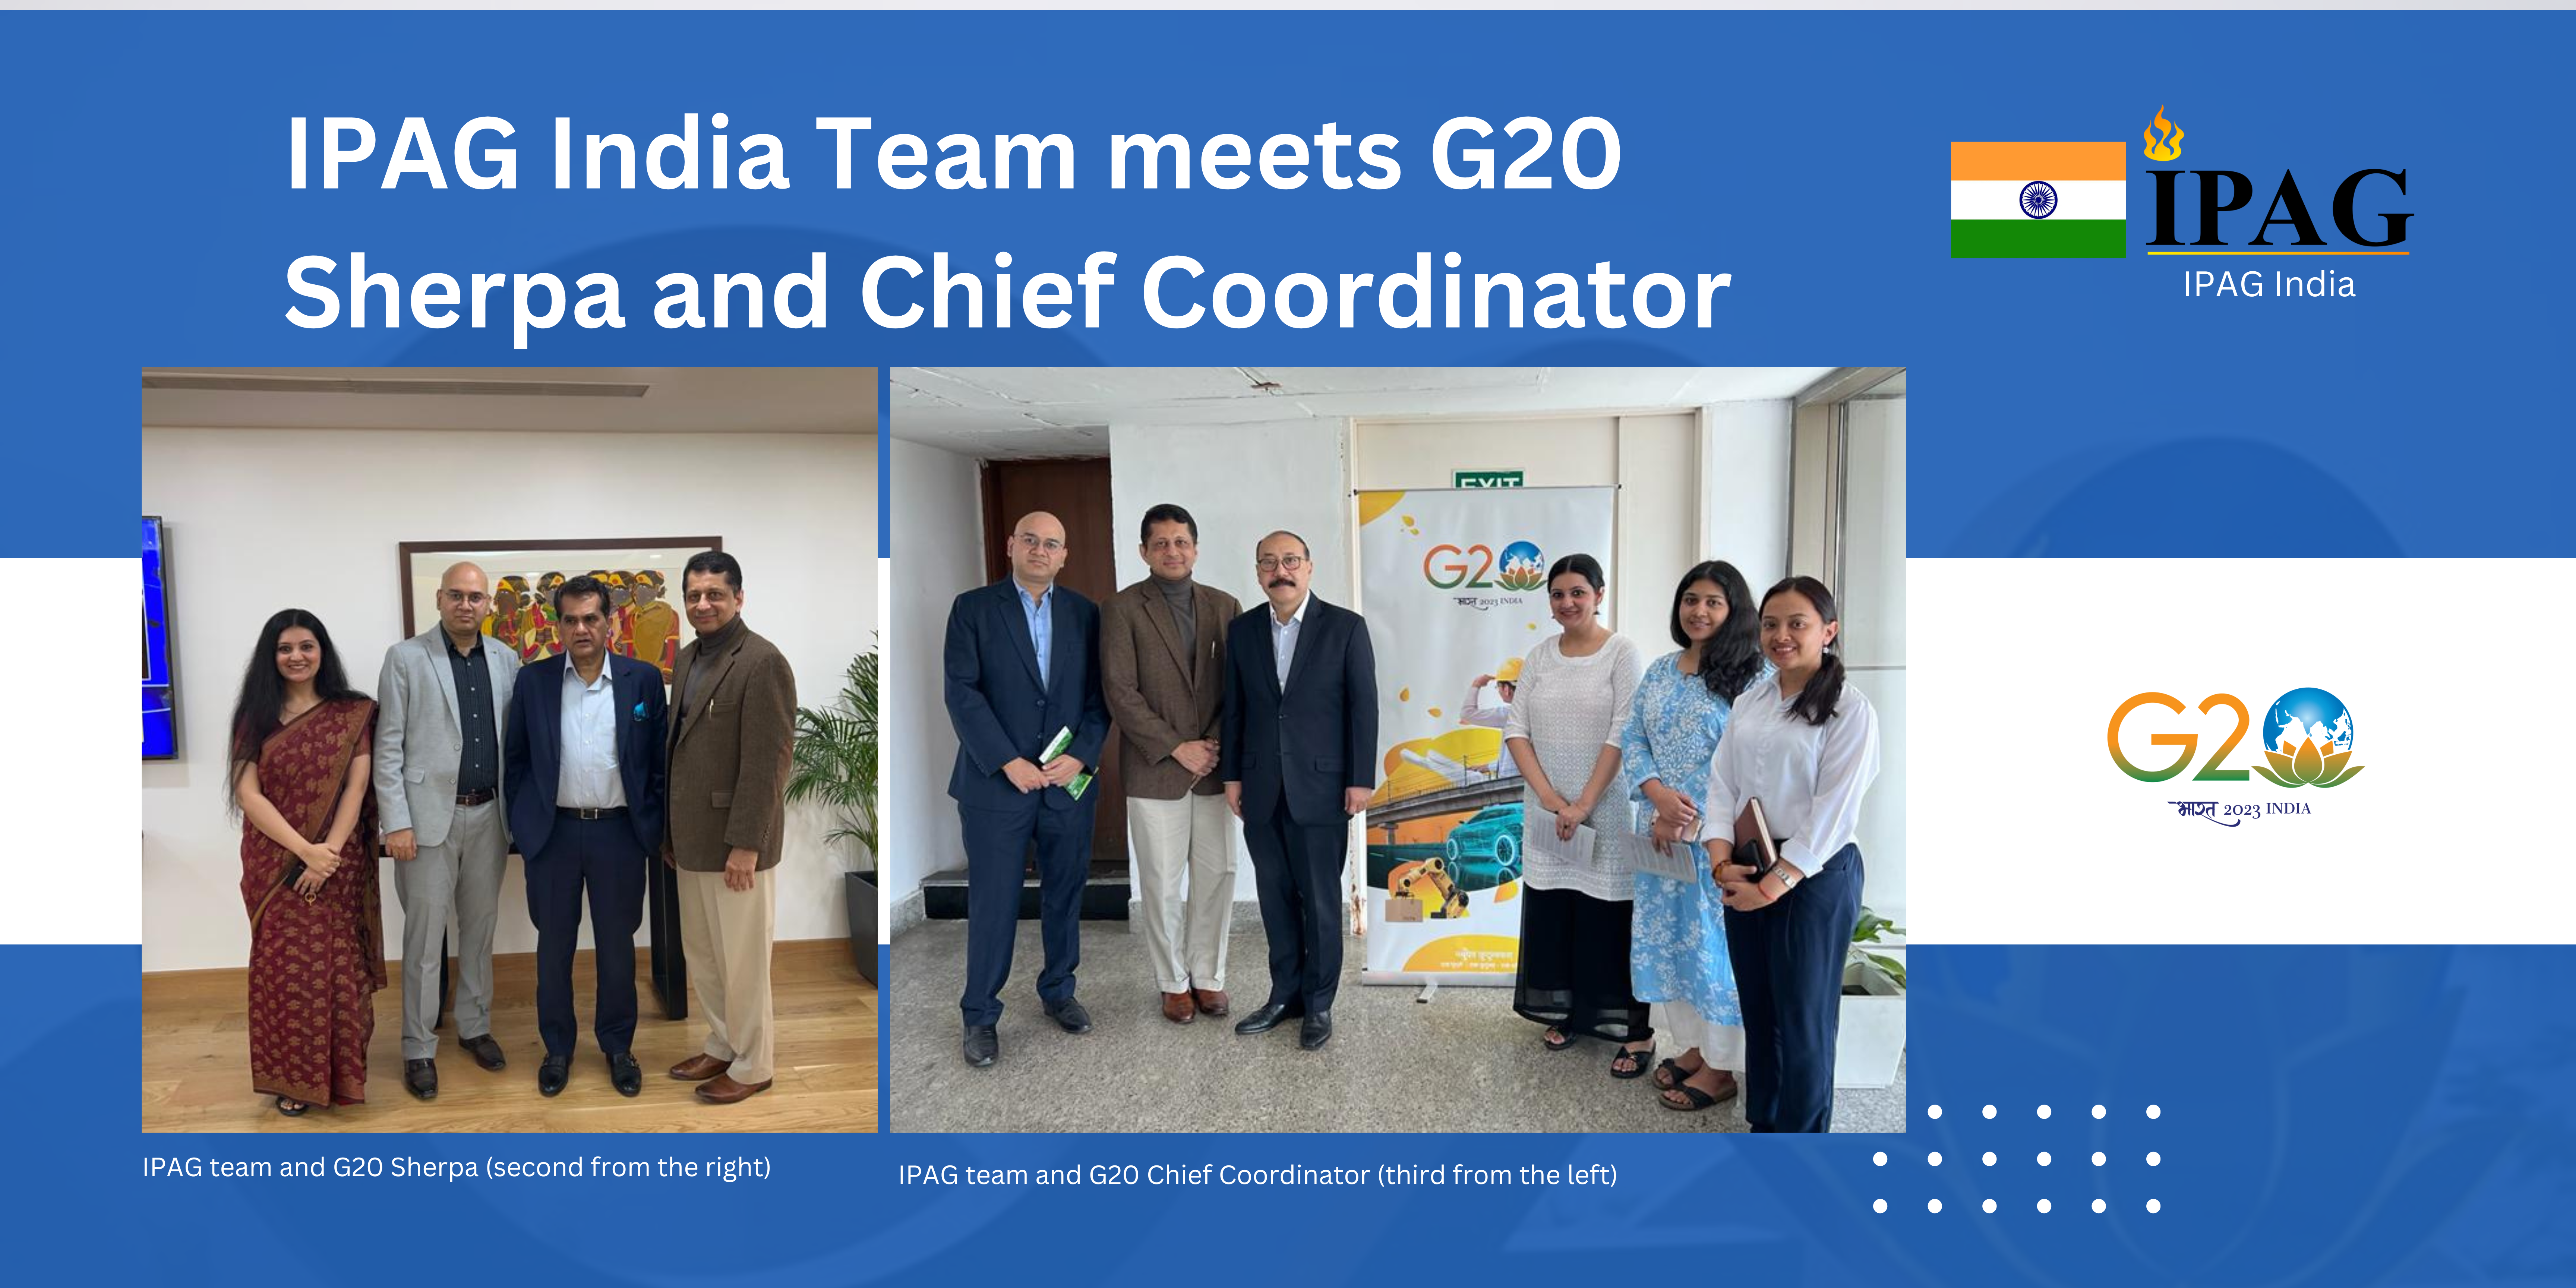 IPAG India Team meets G20 Sherpa and Chief Coordinator